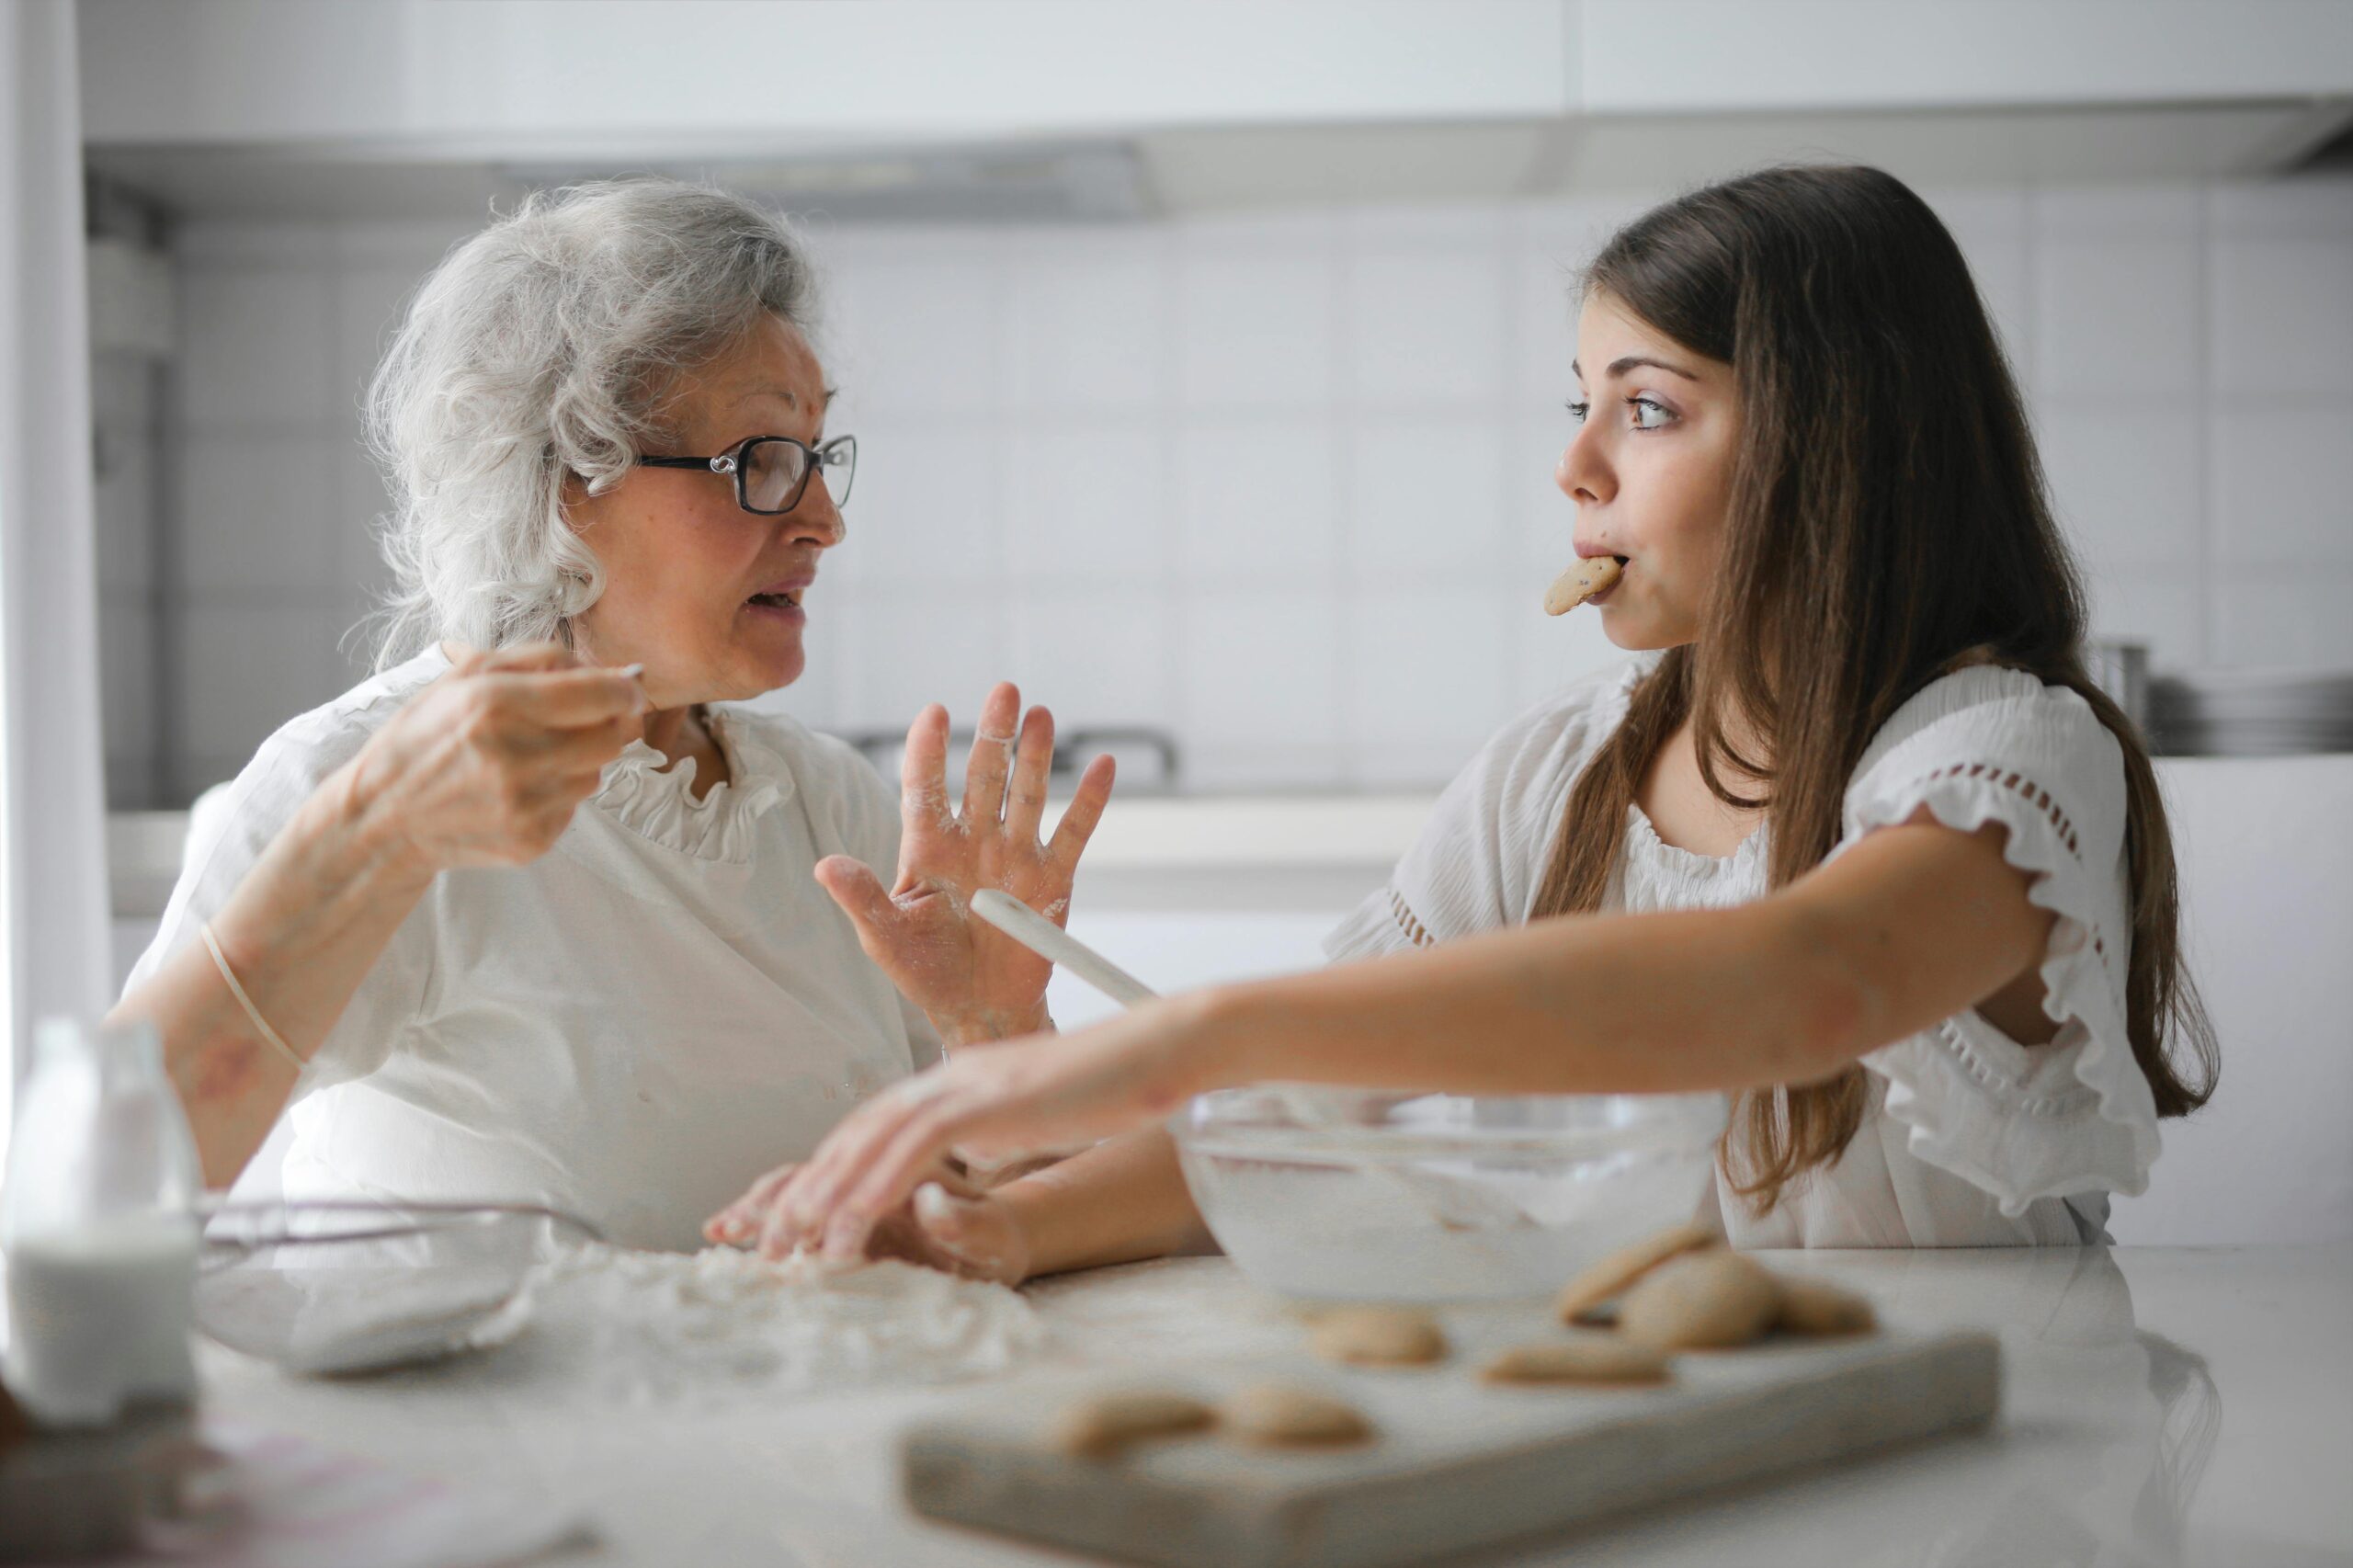 Finding Comfort The Basics of At-Home Care